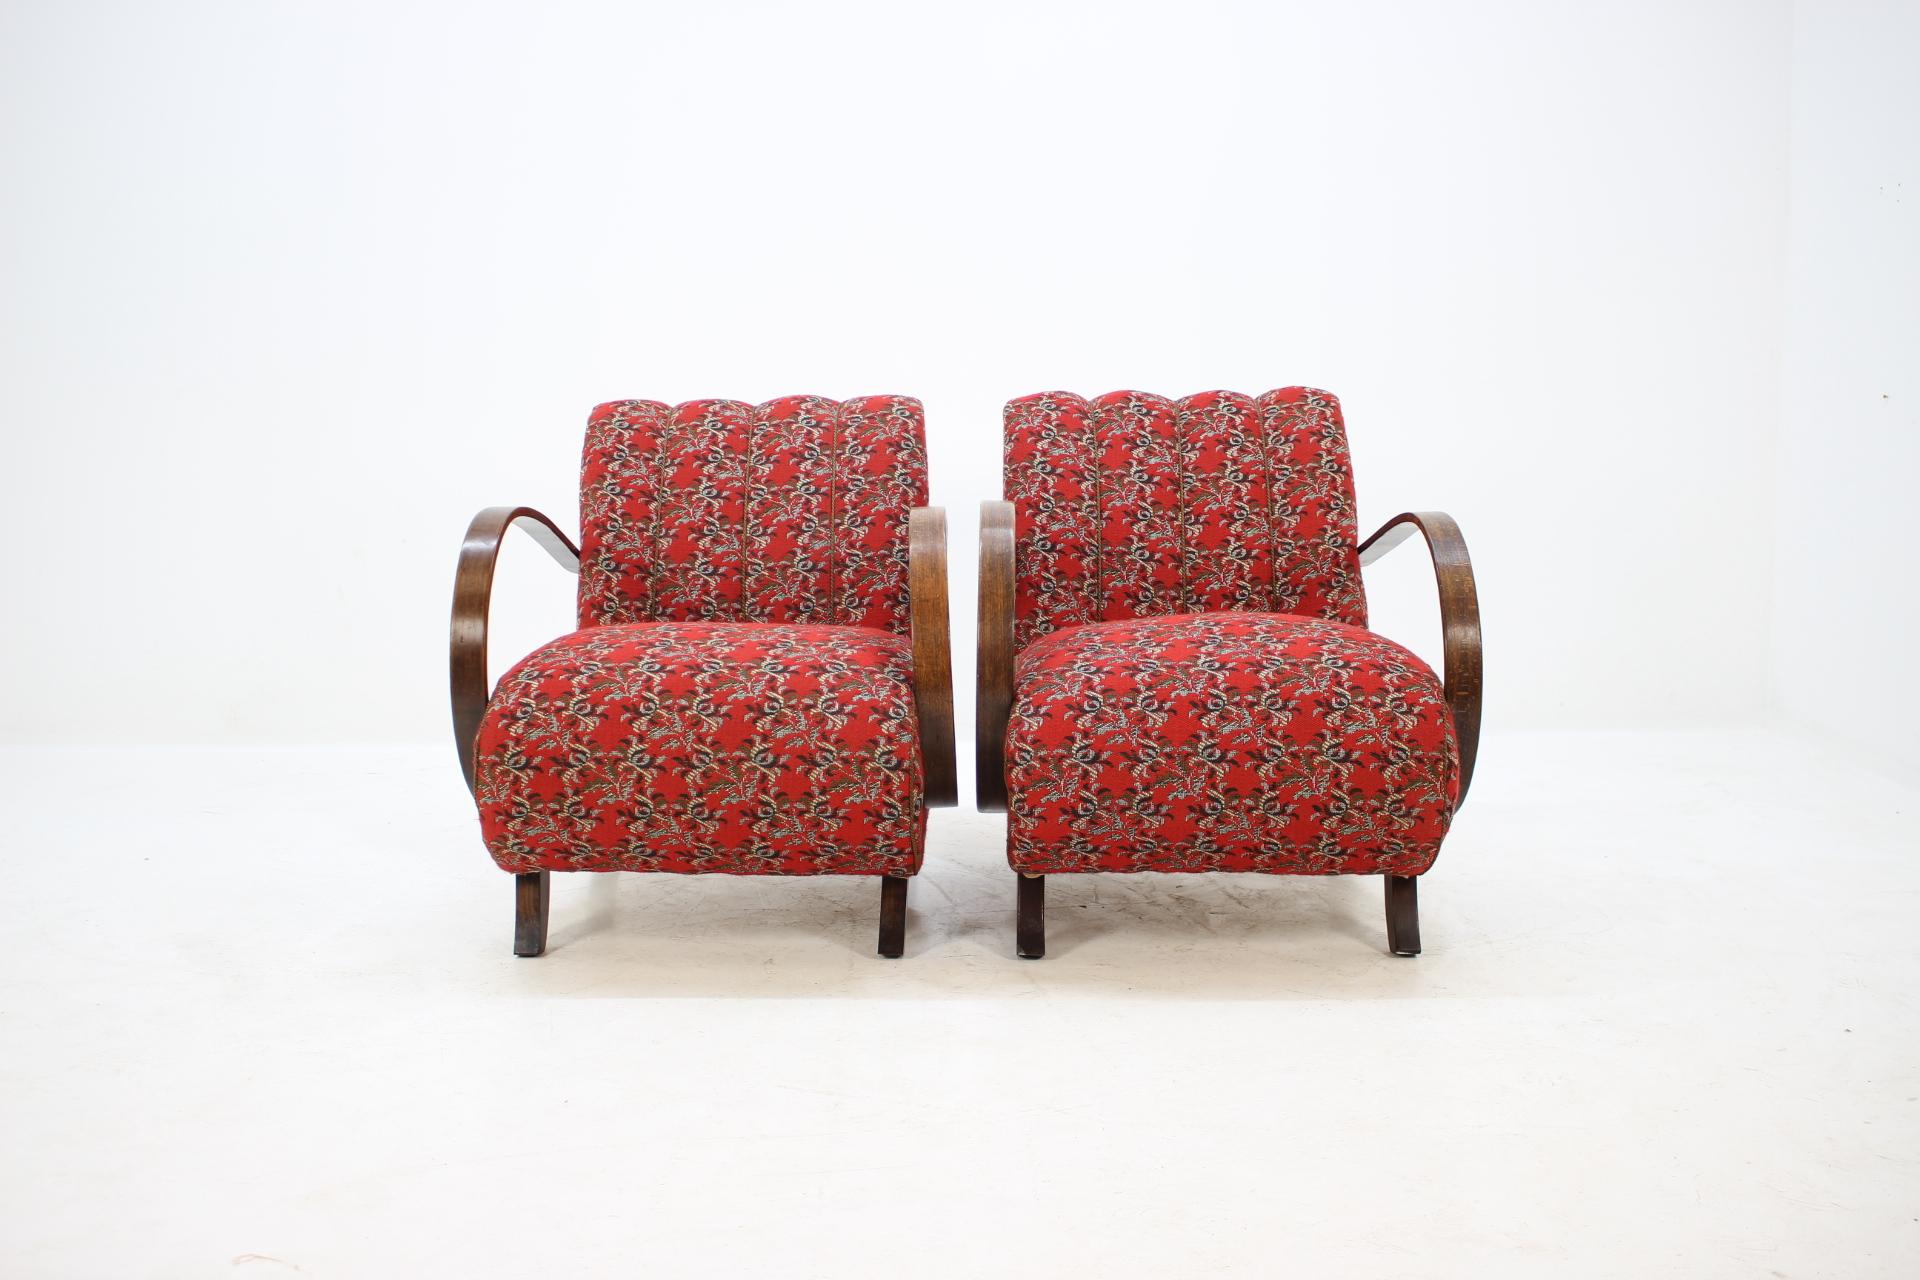 Made of beechwood. Good original fabric upholstery. Made in Czechoslovakia. The wooden parts has been repolished.